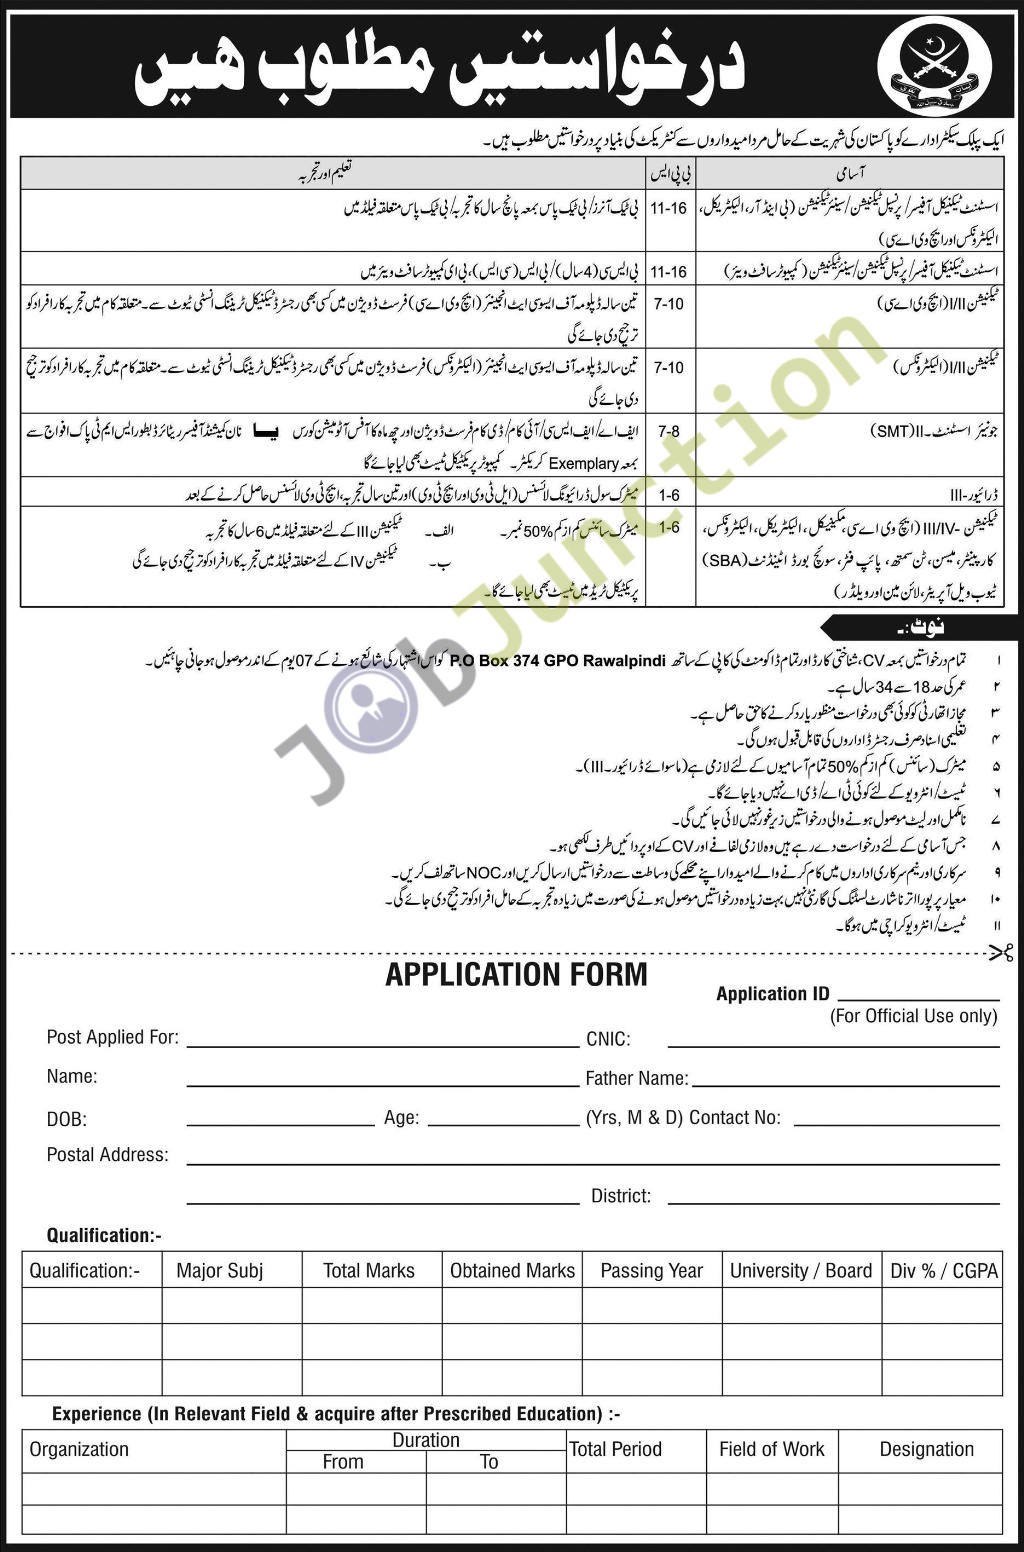 List of dmg officers posted in the punjab 2019 pakistan